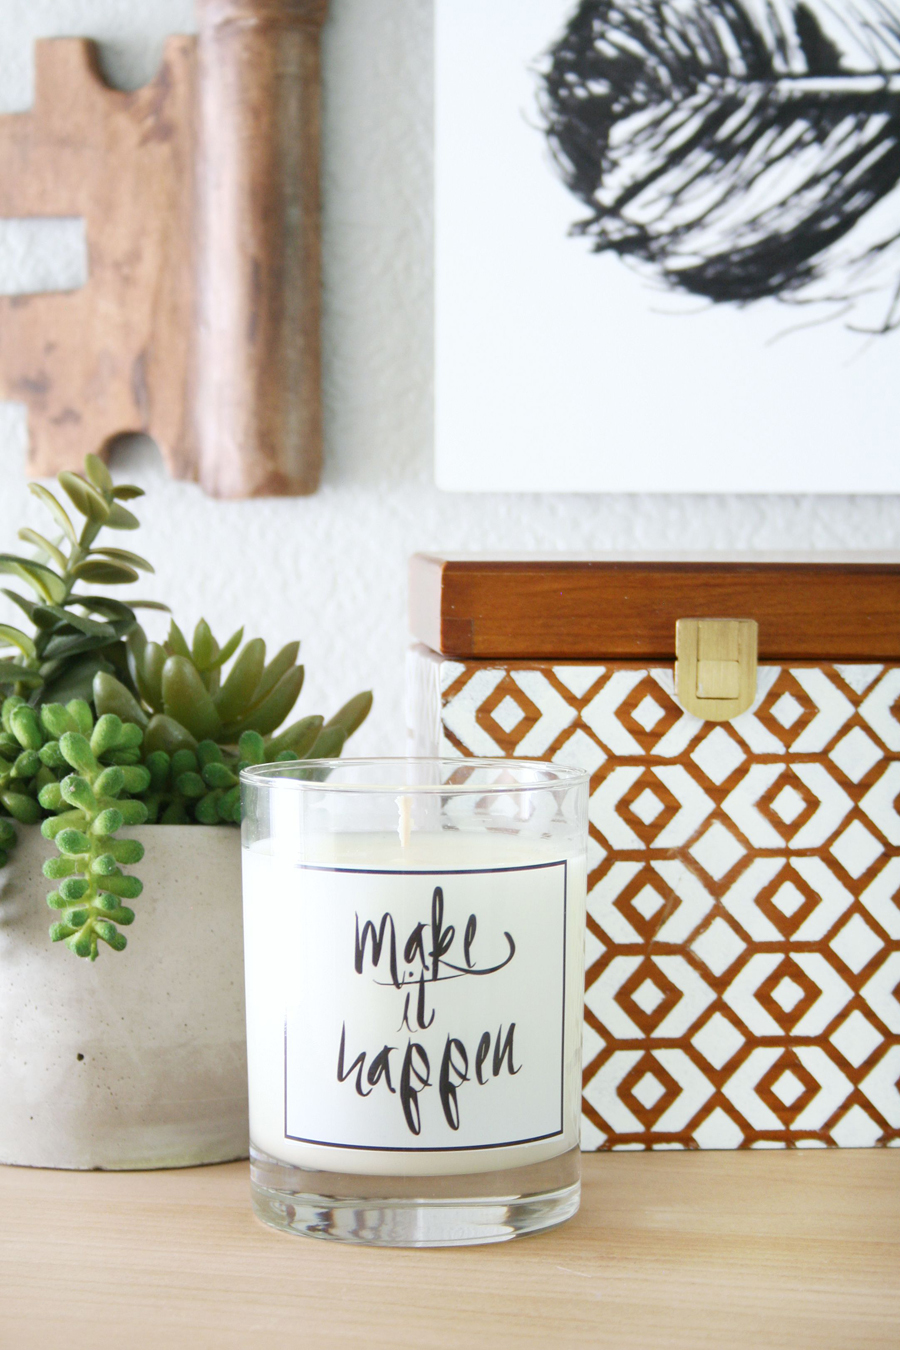 Create Meaningful Decor with Shutterfly